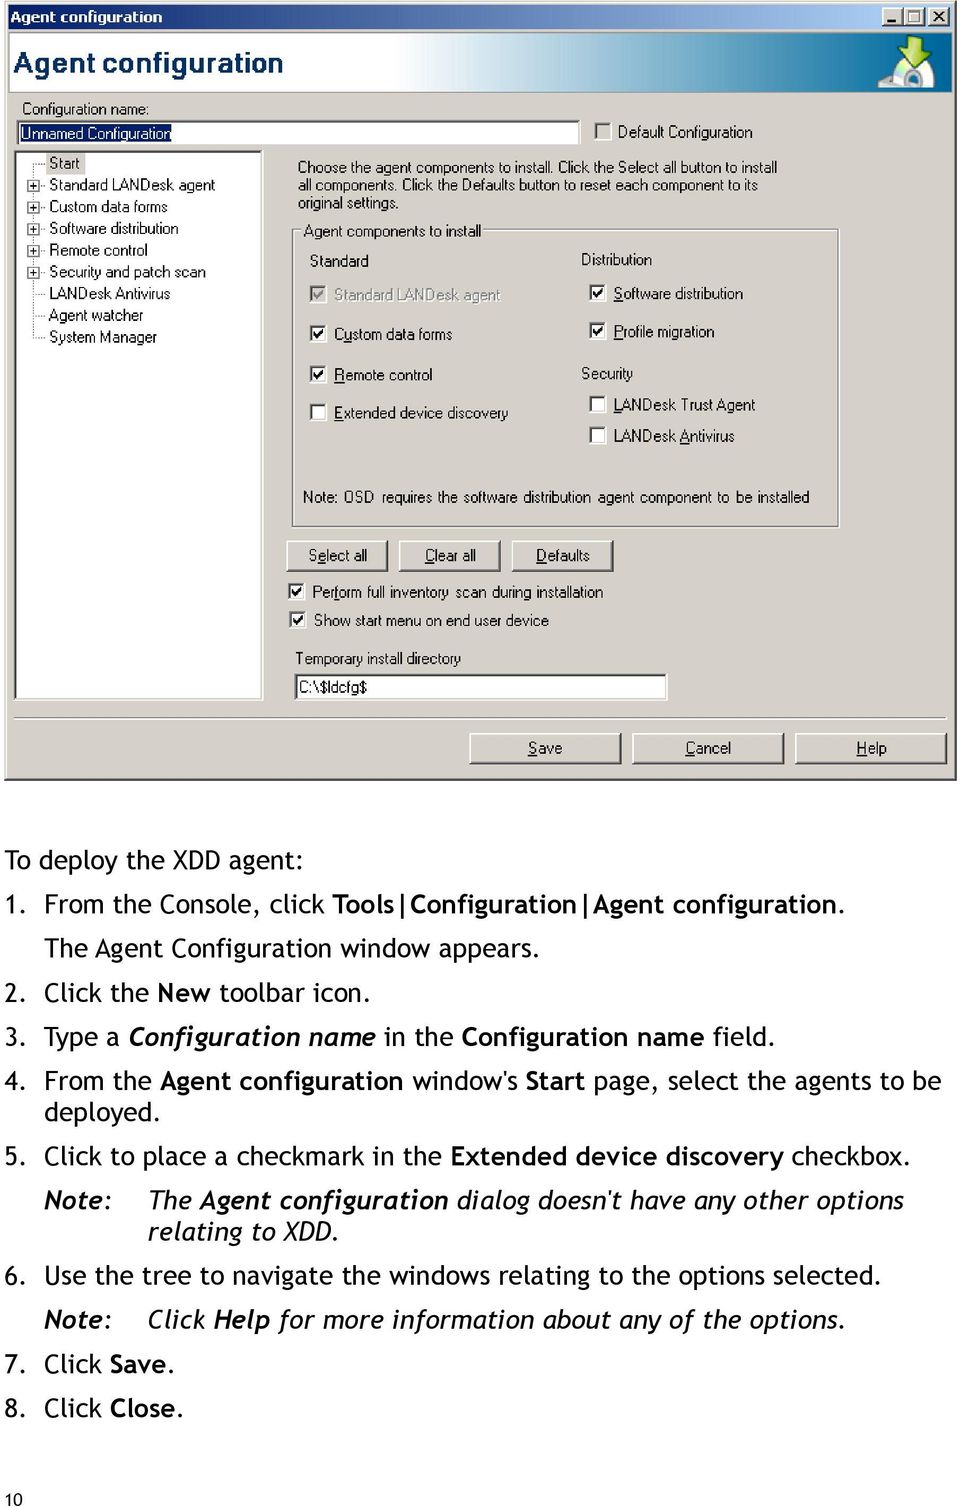 From the Agent configuration window's Start page, select the agents to be deployed. 5. Click to place a checkmark in the Extended device discovery checkbox.